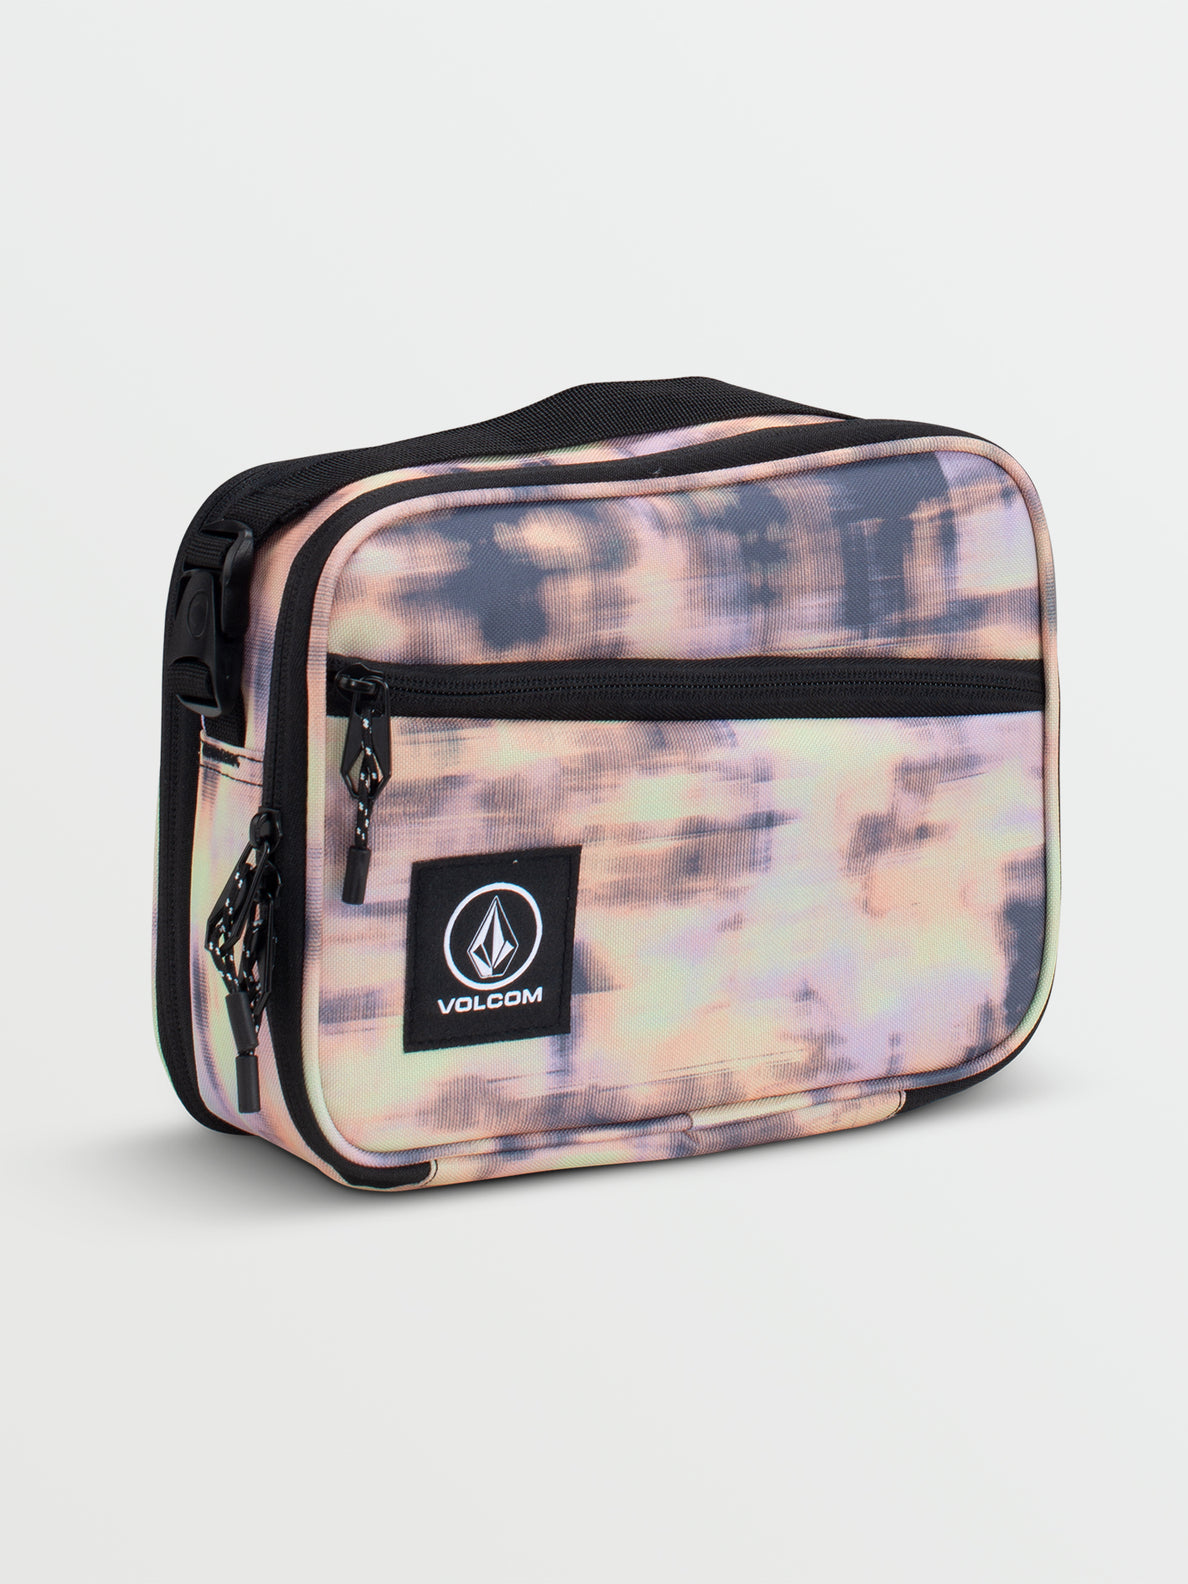 Youth Sid Licious Lunchkit - Storm Cloud